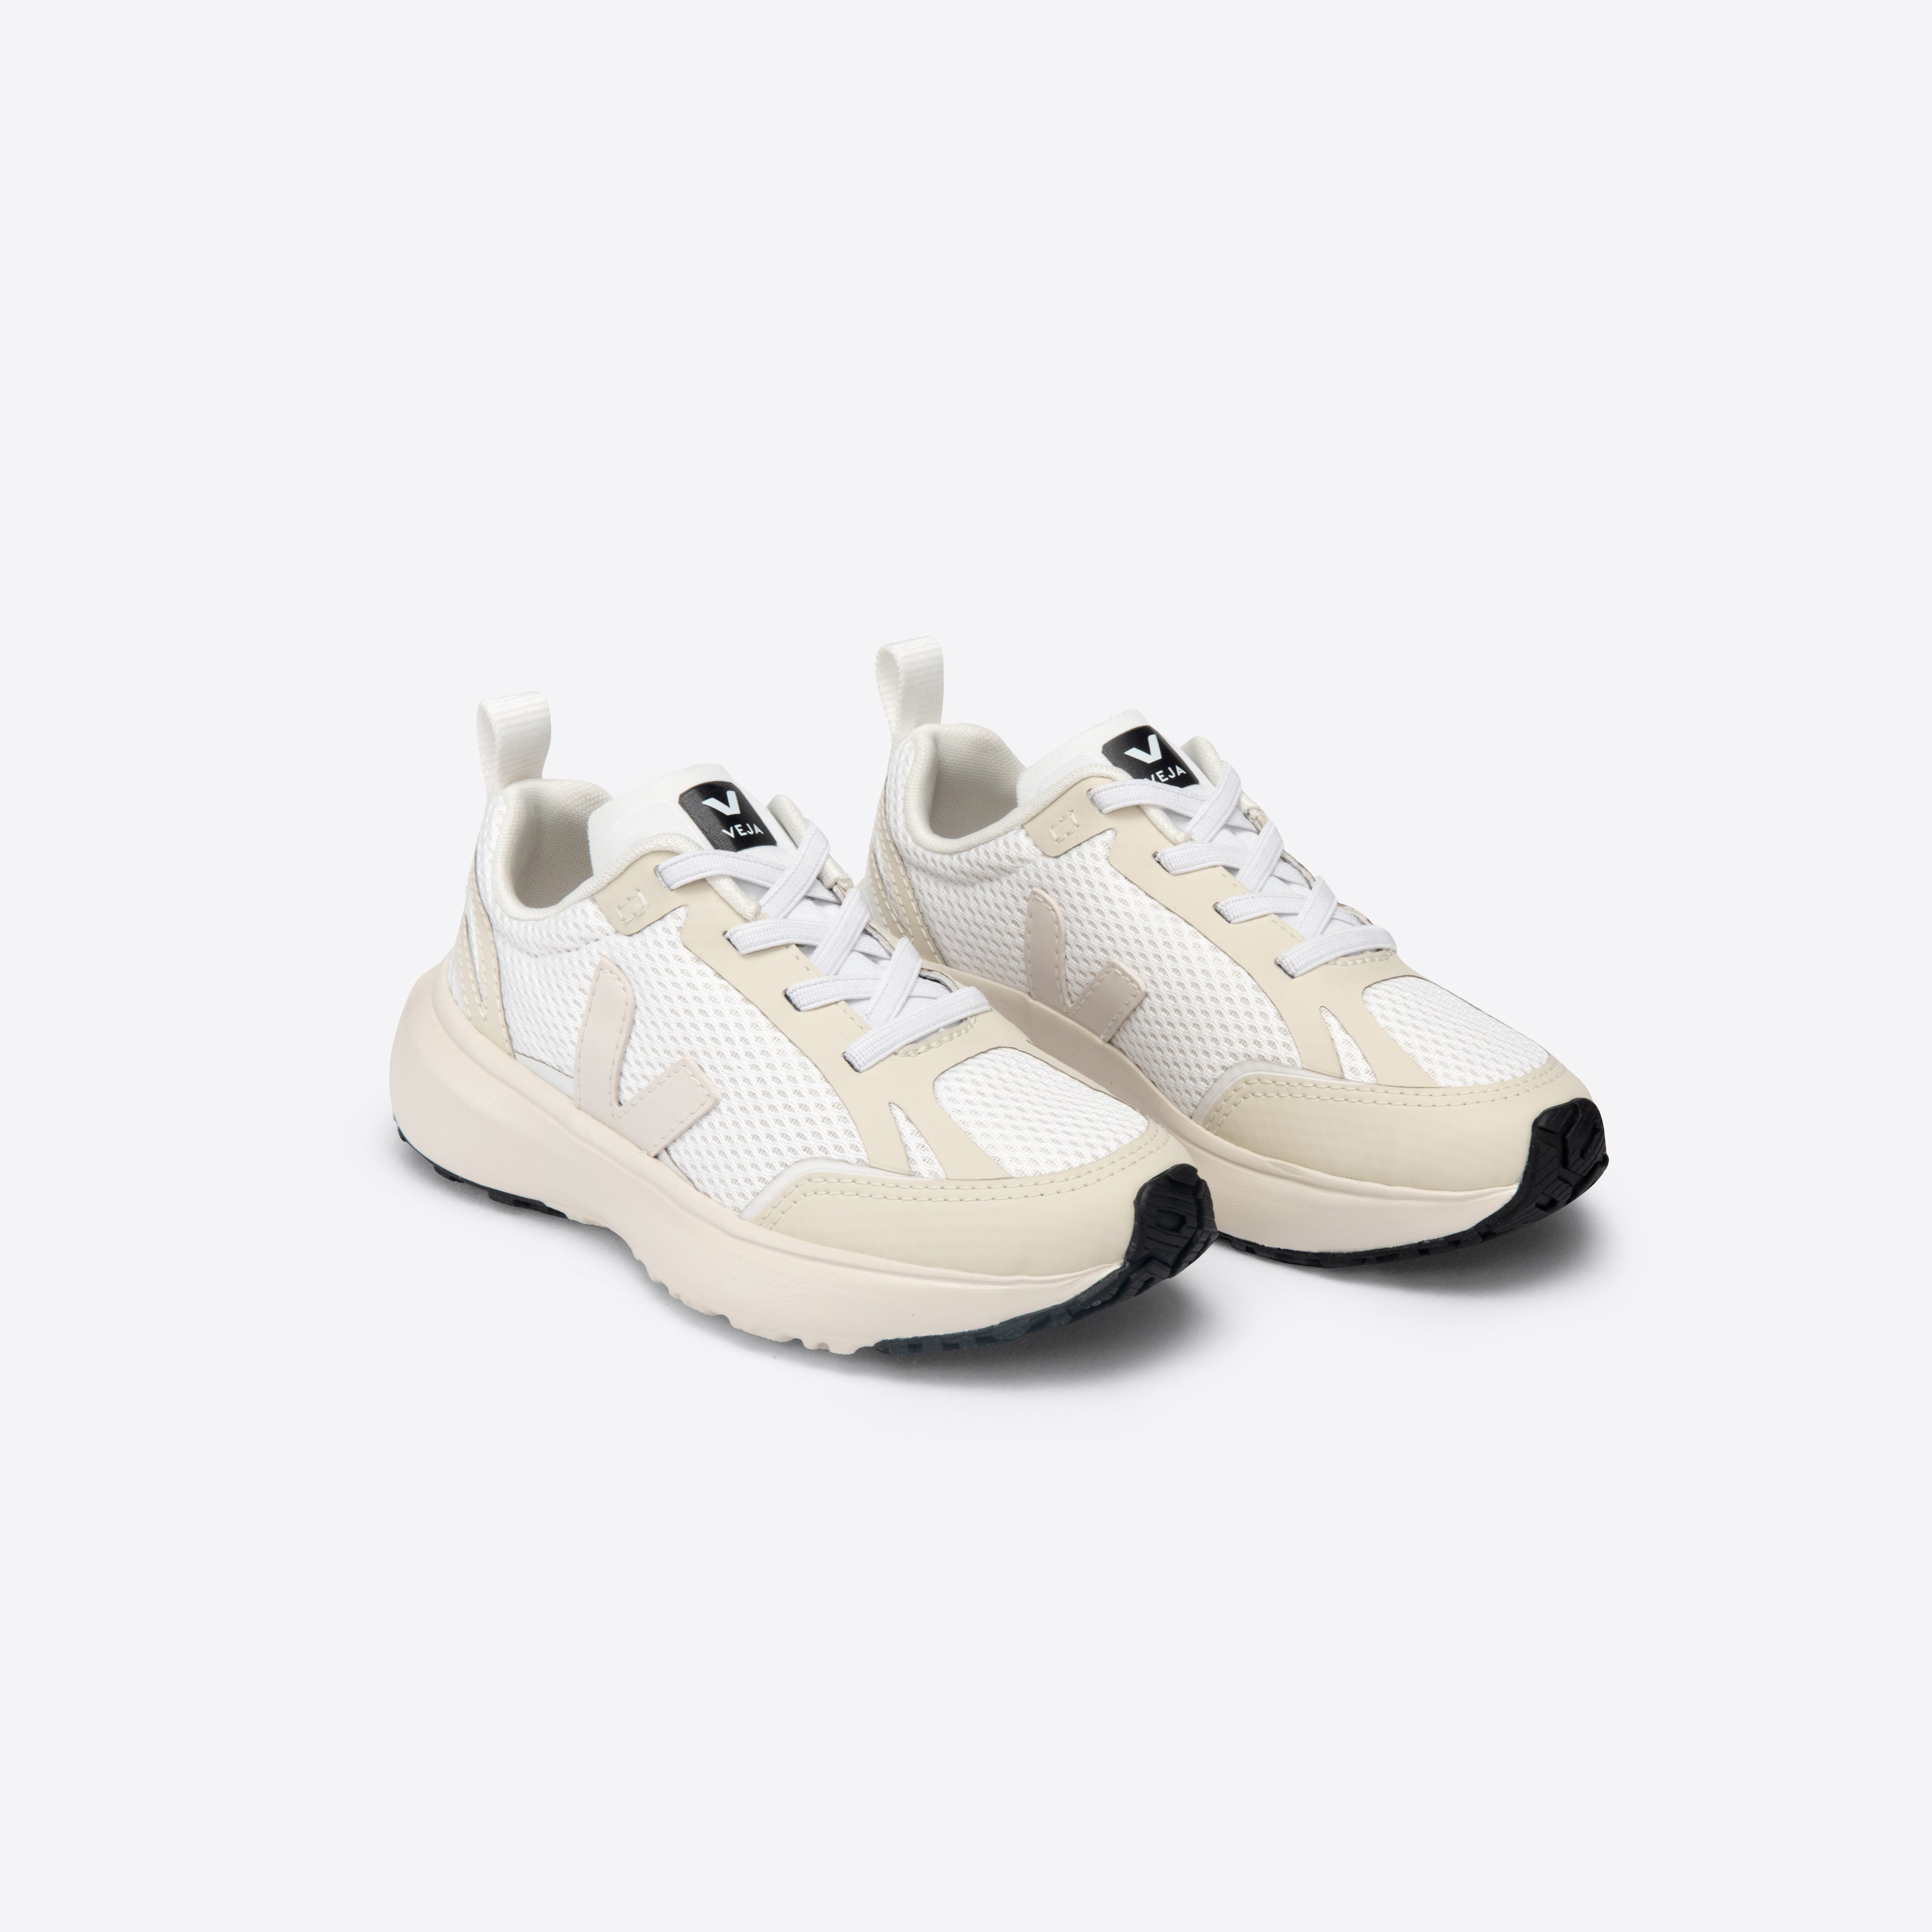 Boys & Girls White "SMALL CANARY" Shoes